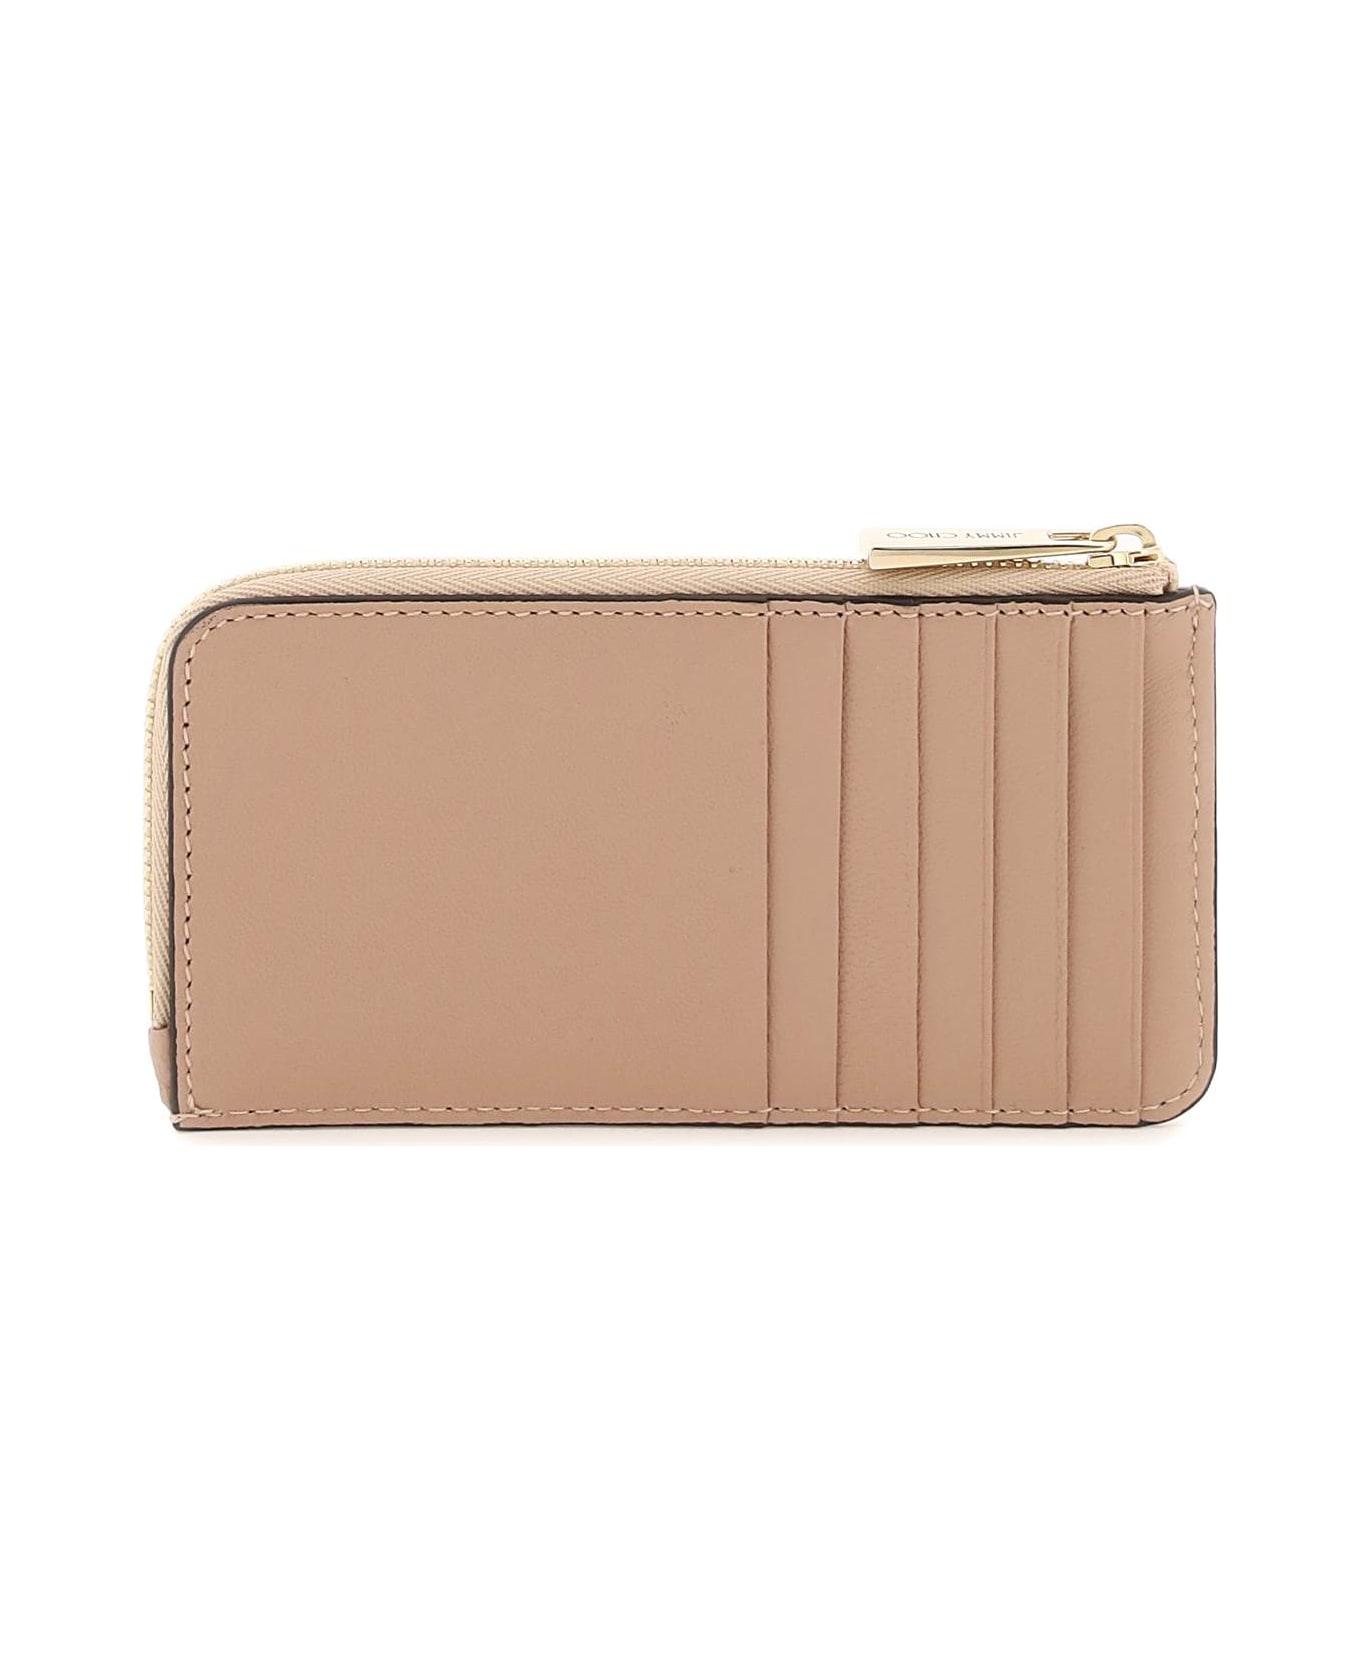 Jimmy Choo Quilted Nappa Leather Zipped Cardholder - BALLET PINK LIGHT GOLD (Pink)